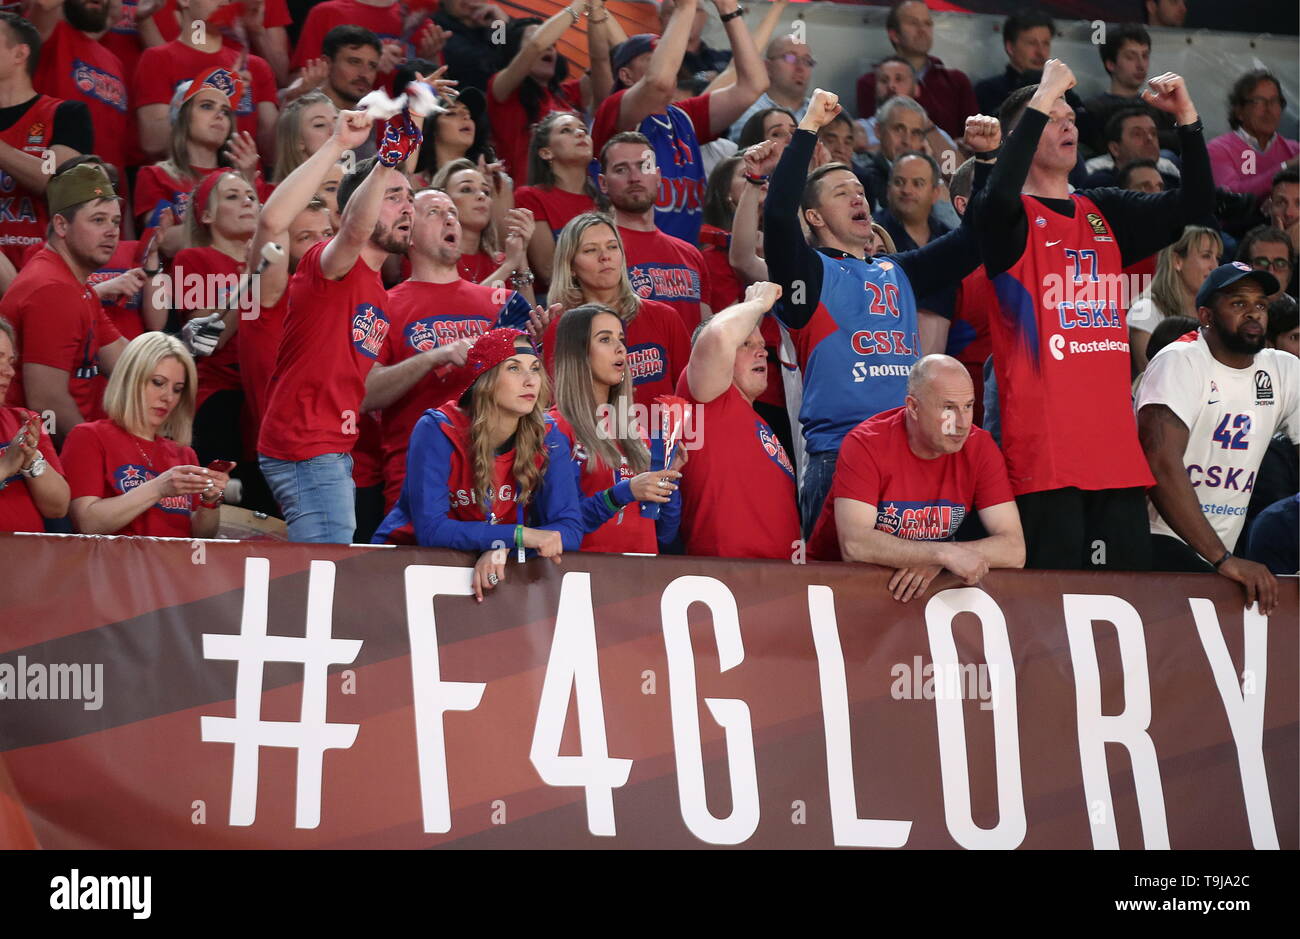 Vitoria Gasteiz, Spain. 19th May, 2019. VITORIA-GASTEIZ, SPAIN - MAY 19,  2019: BC CSKA Moscow's supporters cheer in their 2019 Basketball Euroleague  Final Four championship game against BC Anadolu Efes Istanbul, at